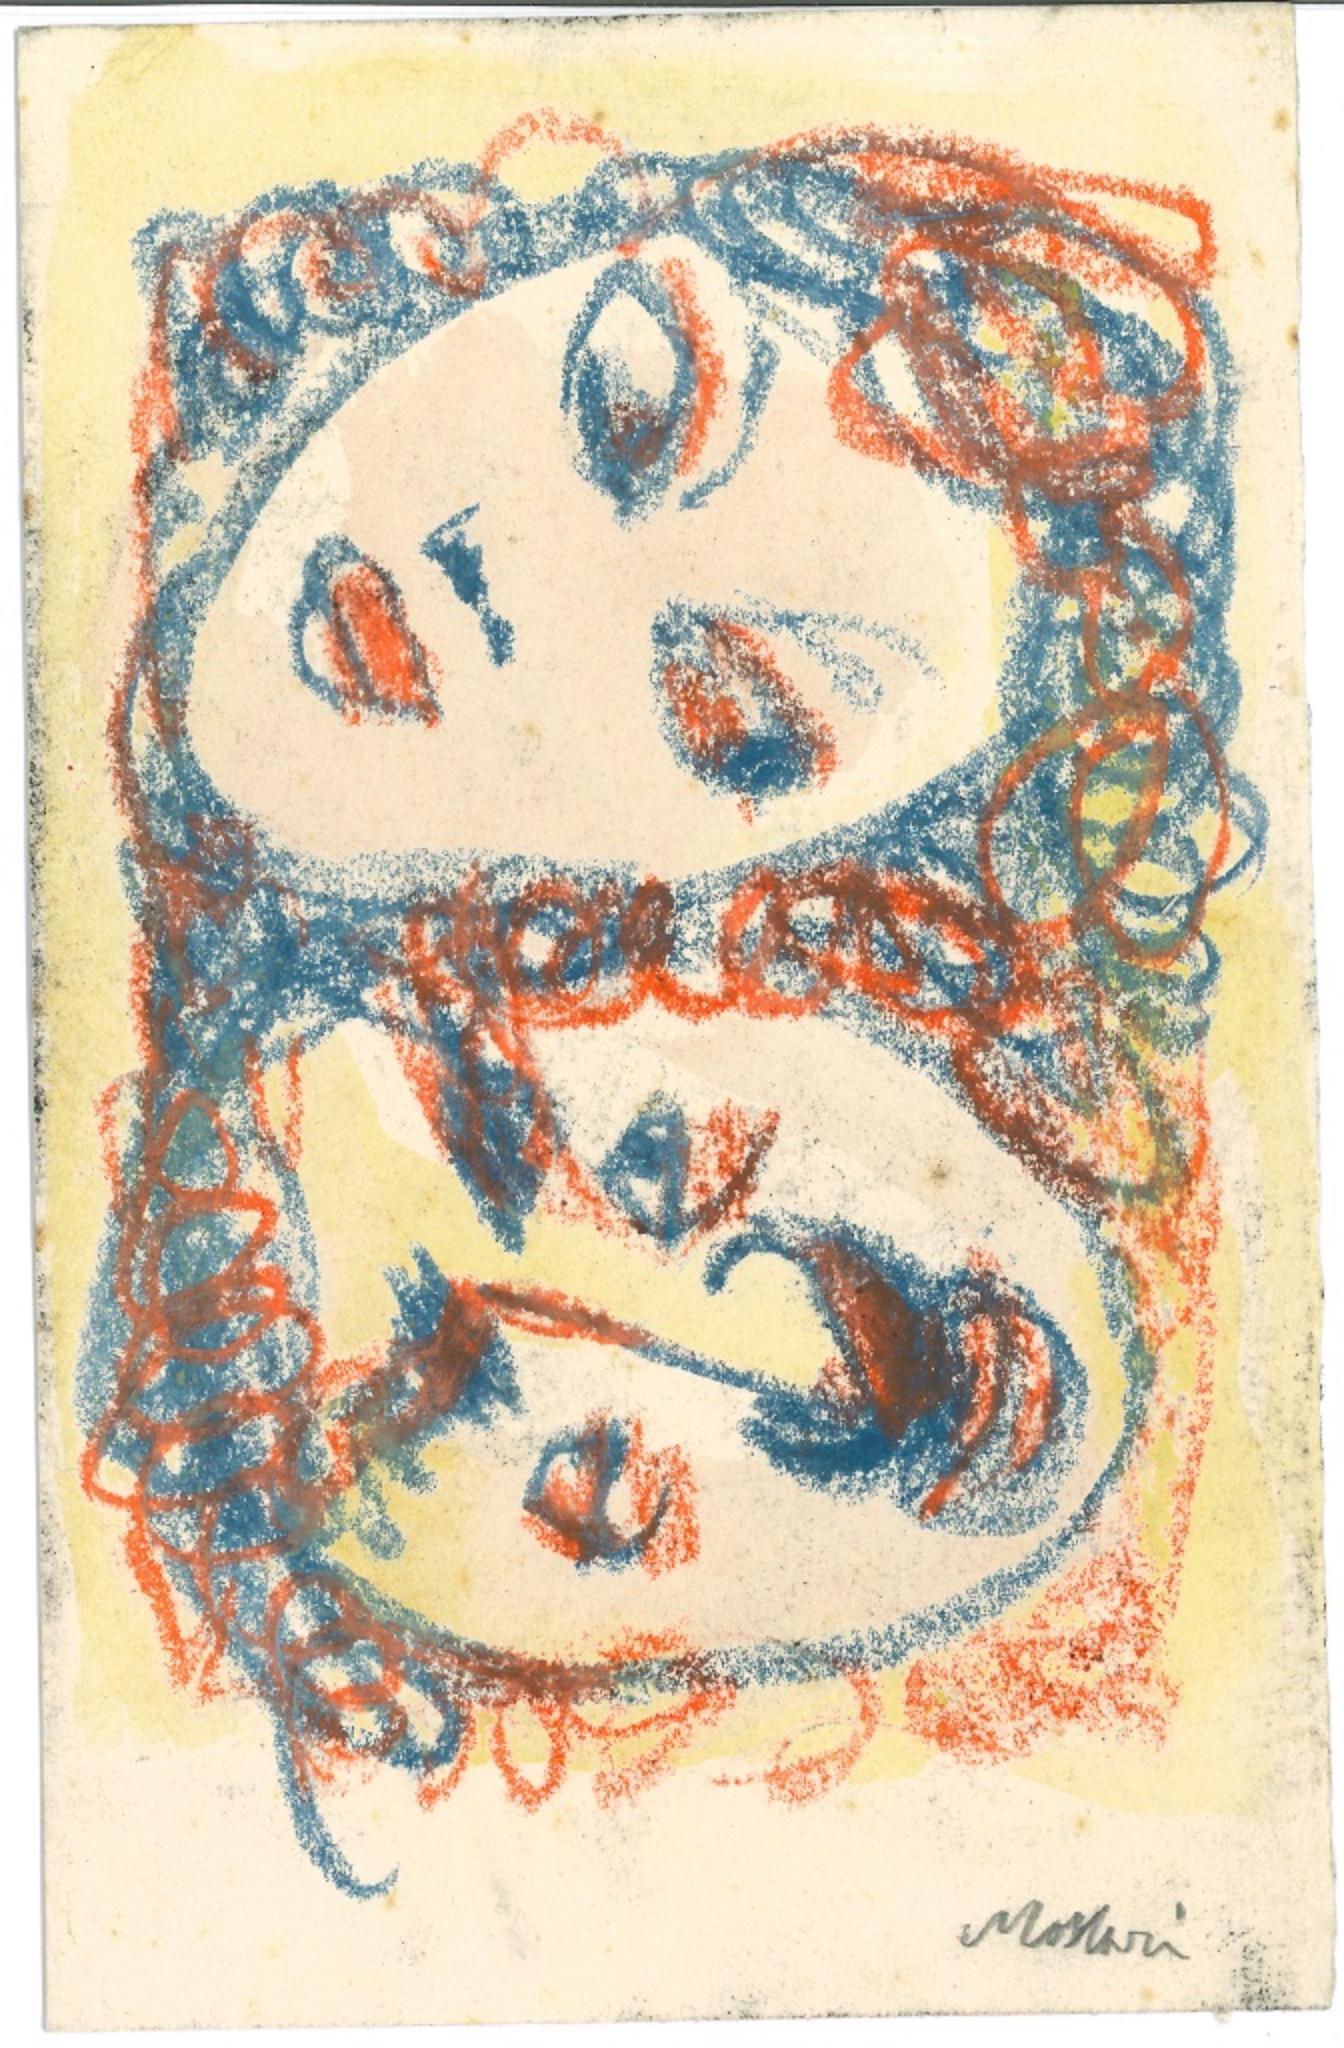 Man and Woman is an original pastel drawing on cardboard paper, realized around the Seventies by the great Italian artist and journalist, Mino Maccari (Siena, 1898 - 1989).

Signed "Maccari" in pencil on the lower right margin. Very good